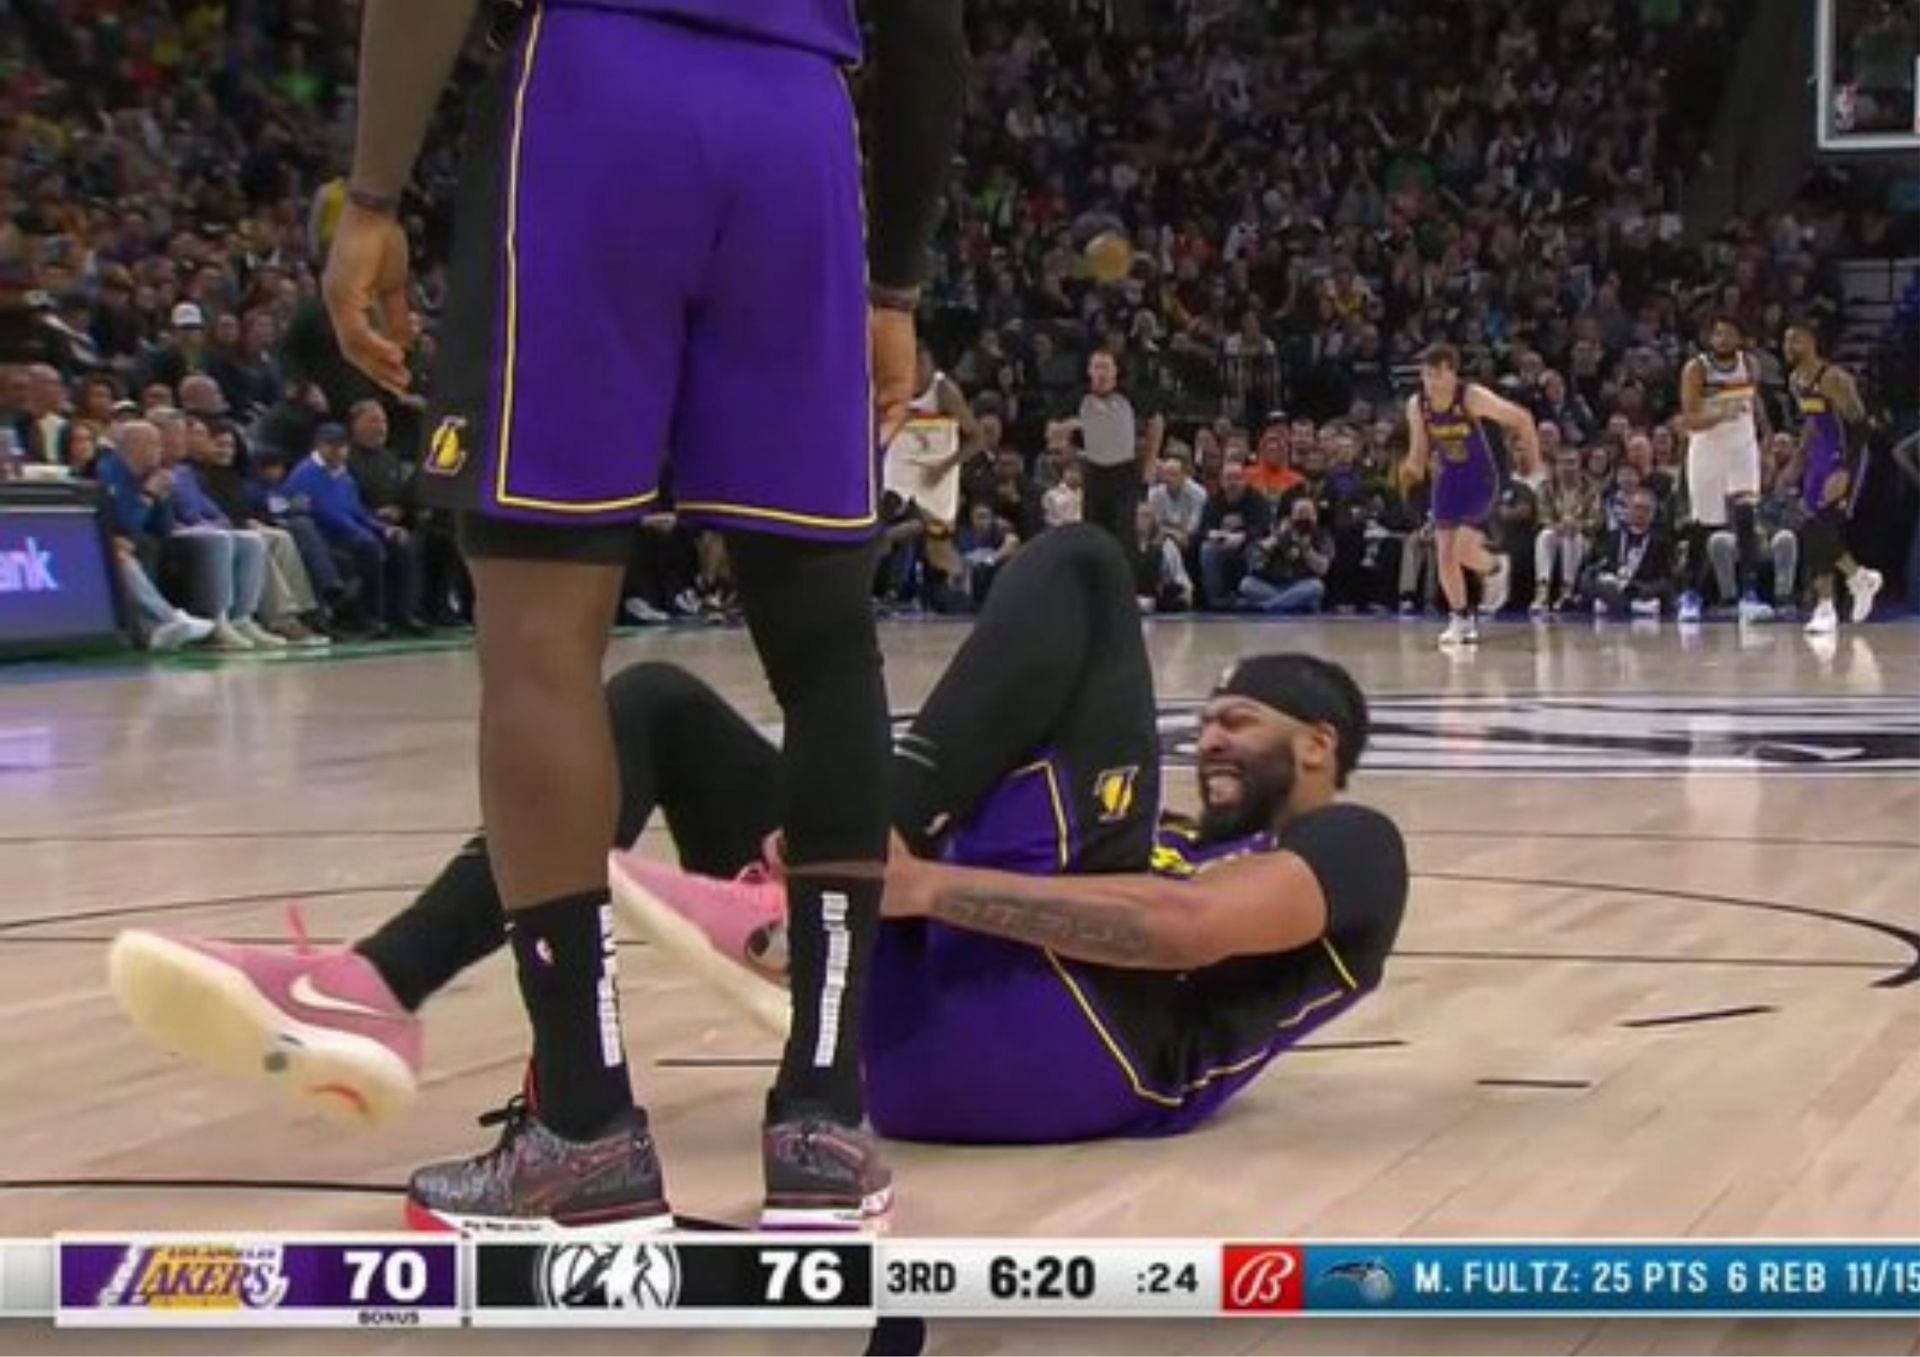 Anthony Davis briefly went down with an injury in the third quarter but return to play for the LA Lakers against the Minnesota Timberwolves.